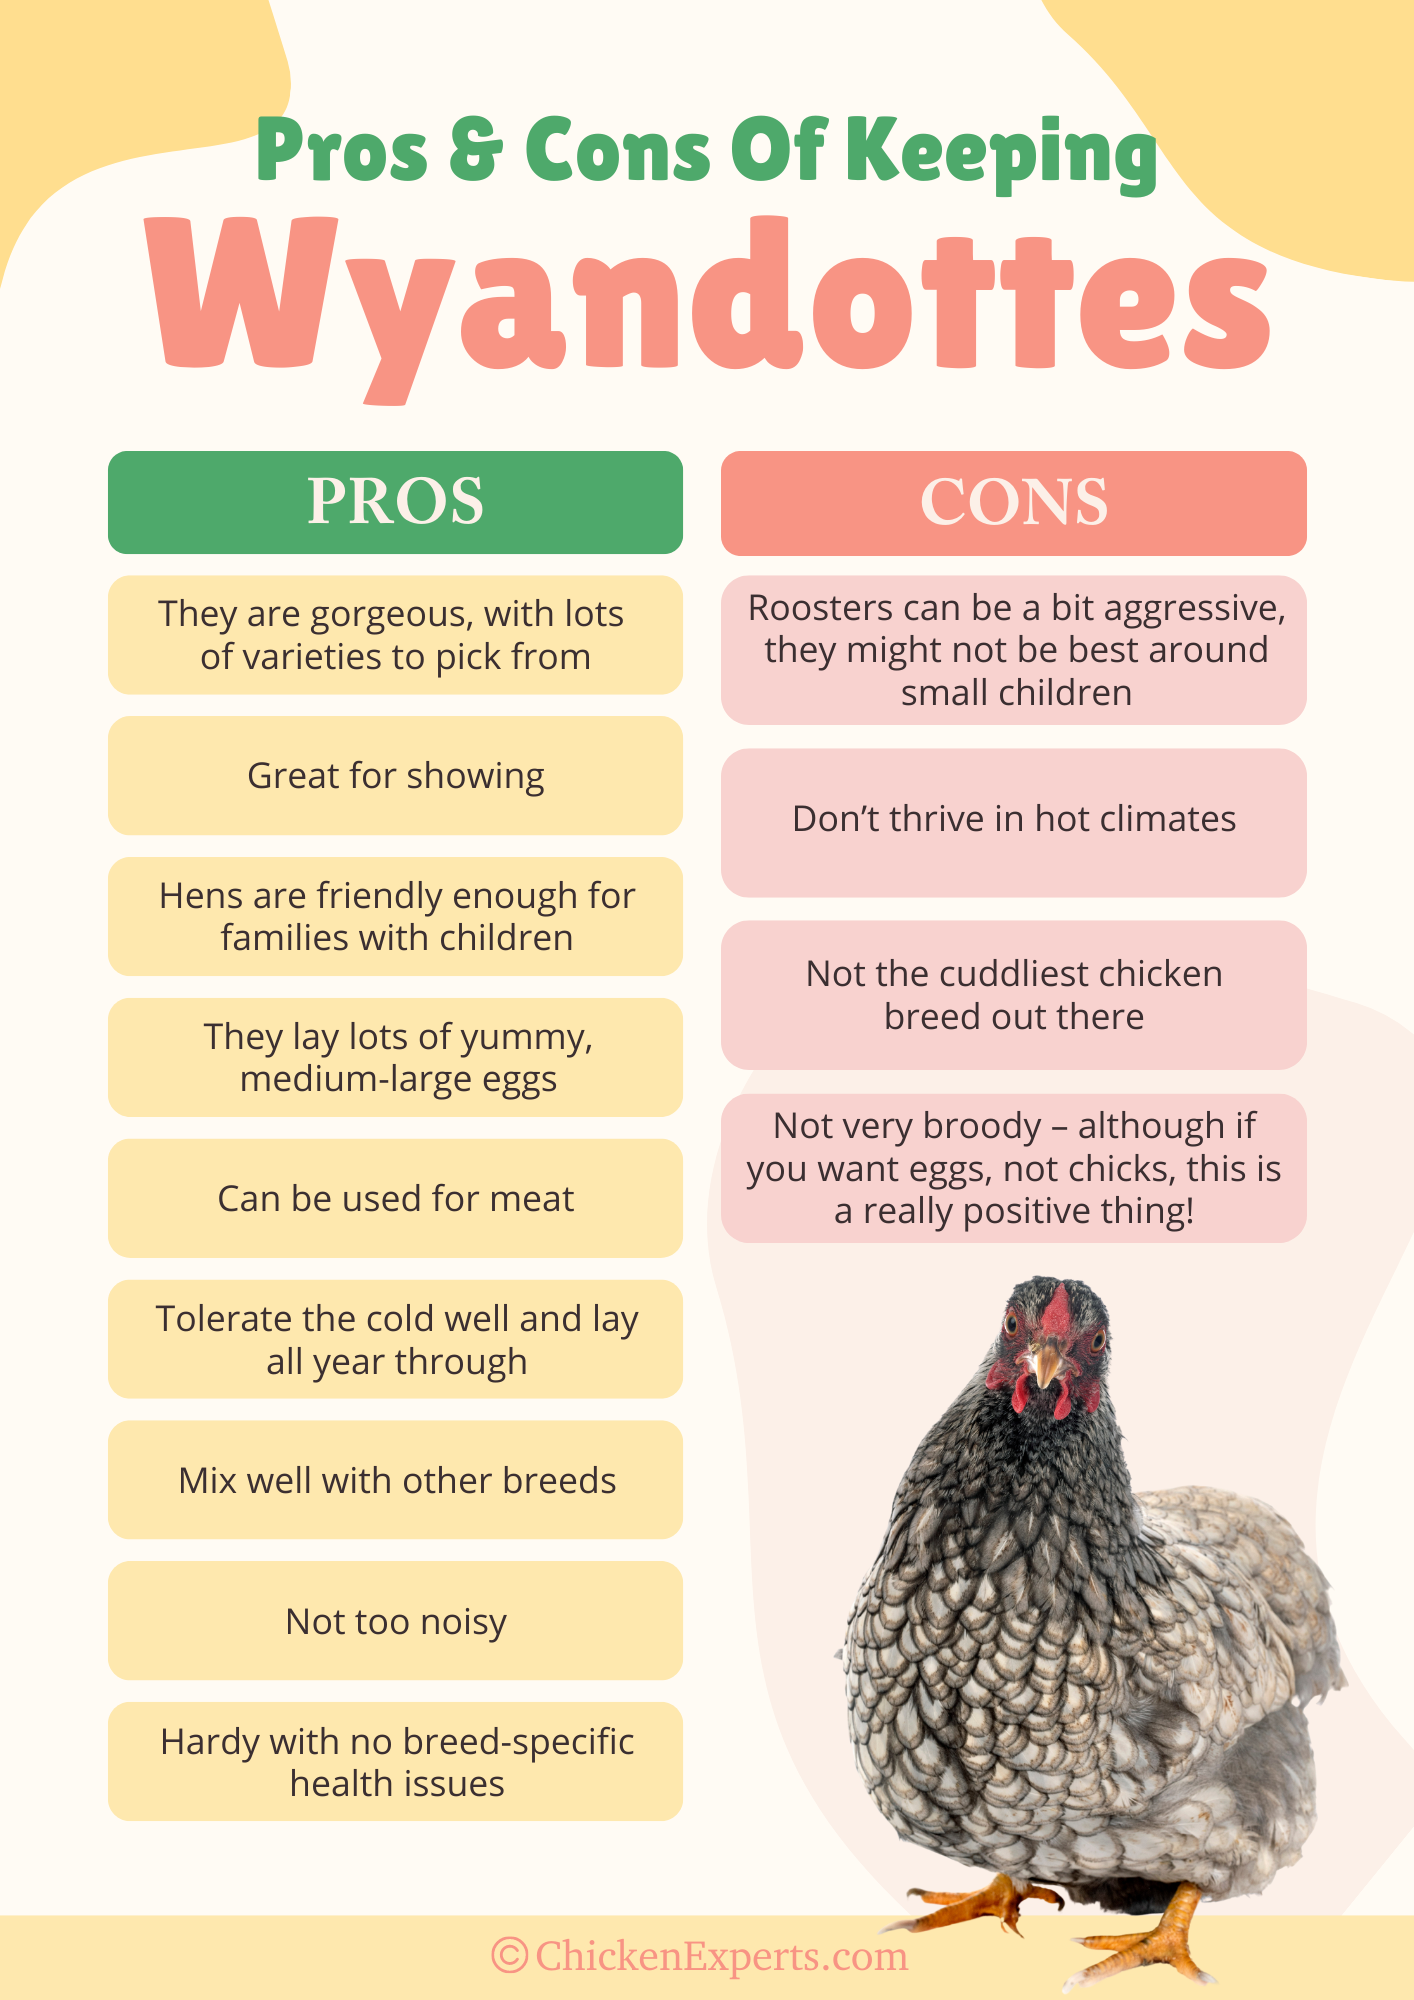 pros and cons of keeping wyandotte chickens